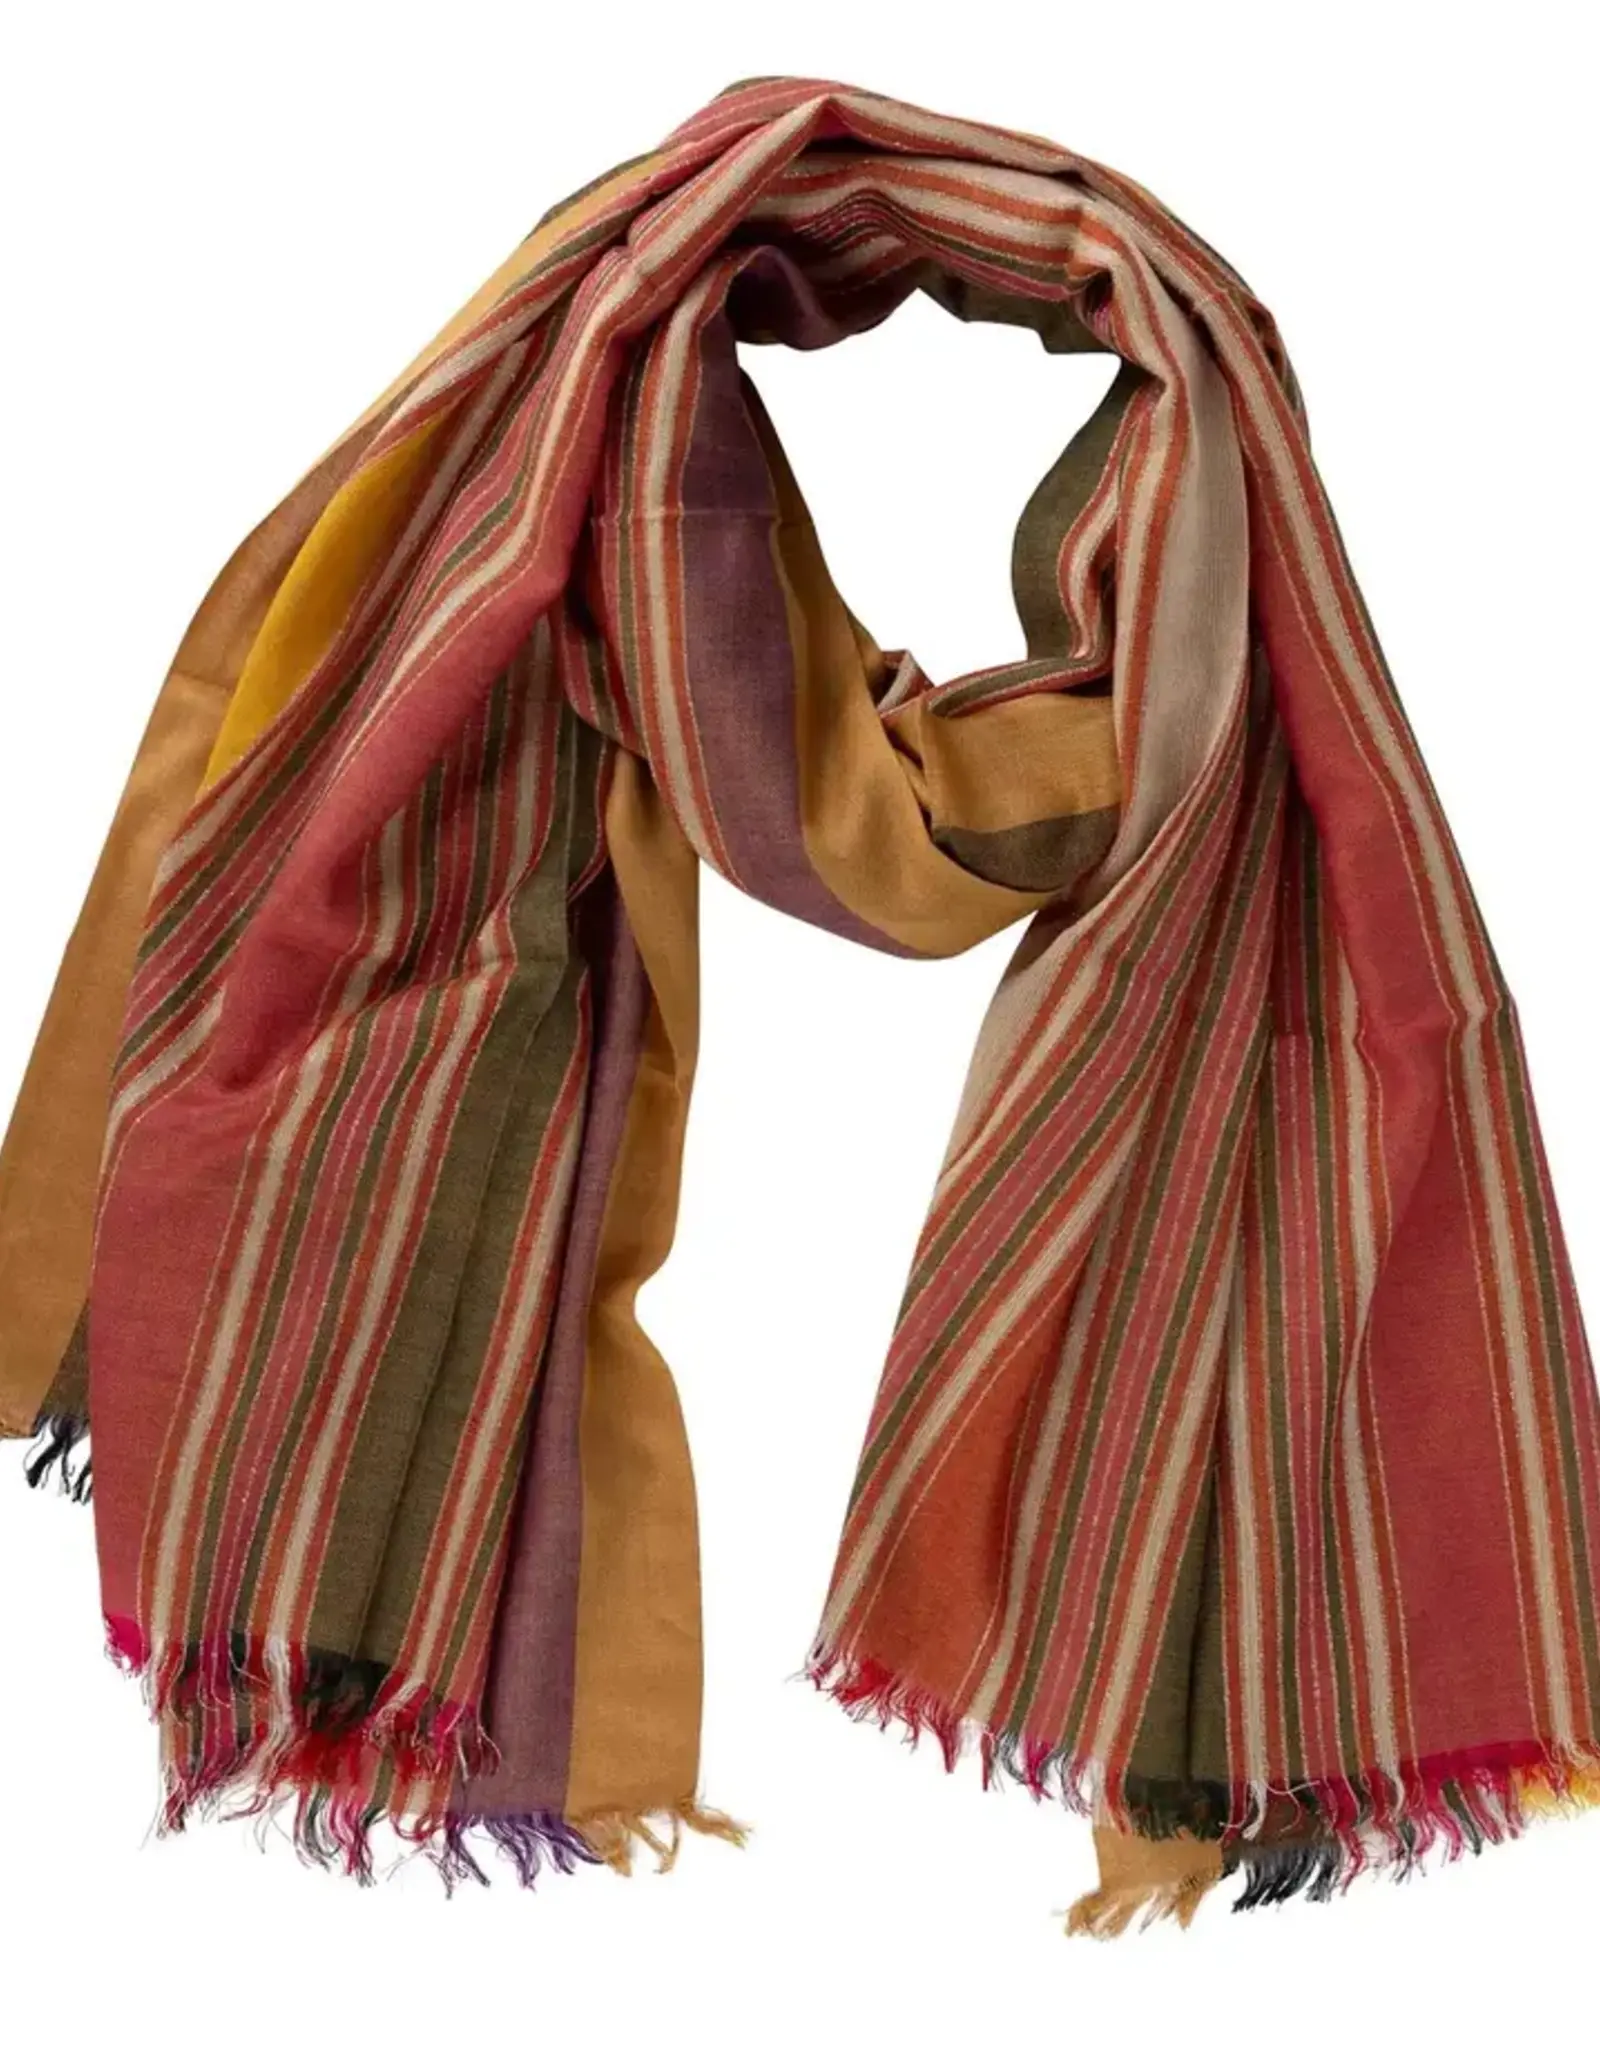 Ten Thousand Villages Expedition Striped Scarf